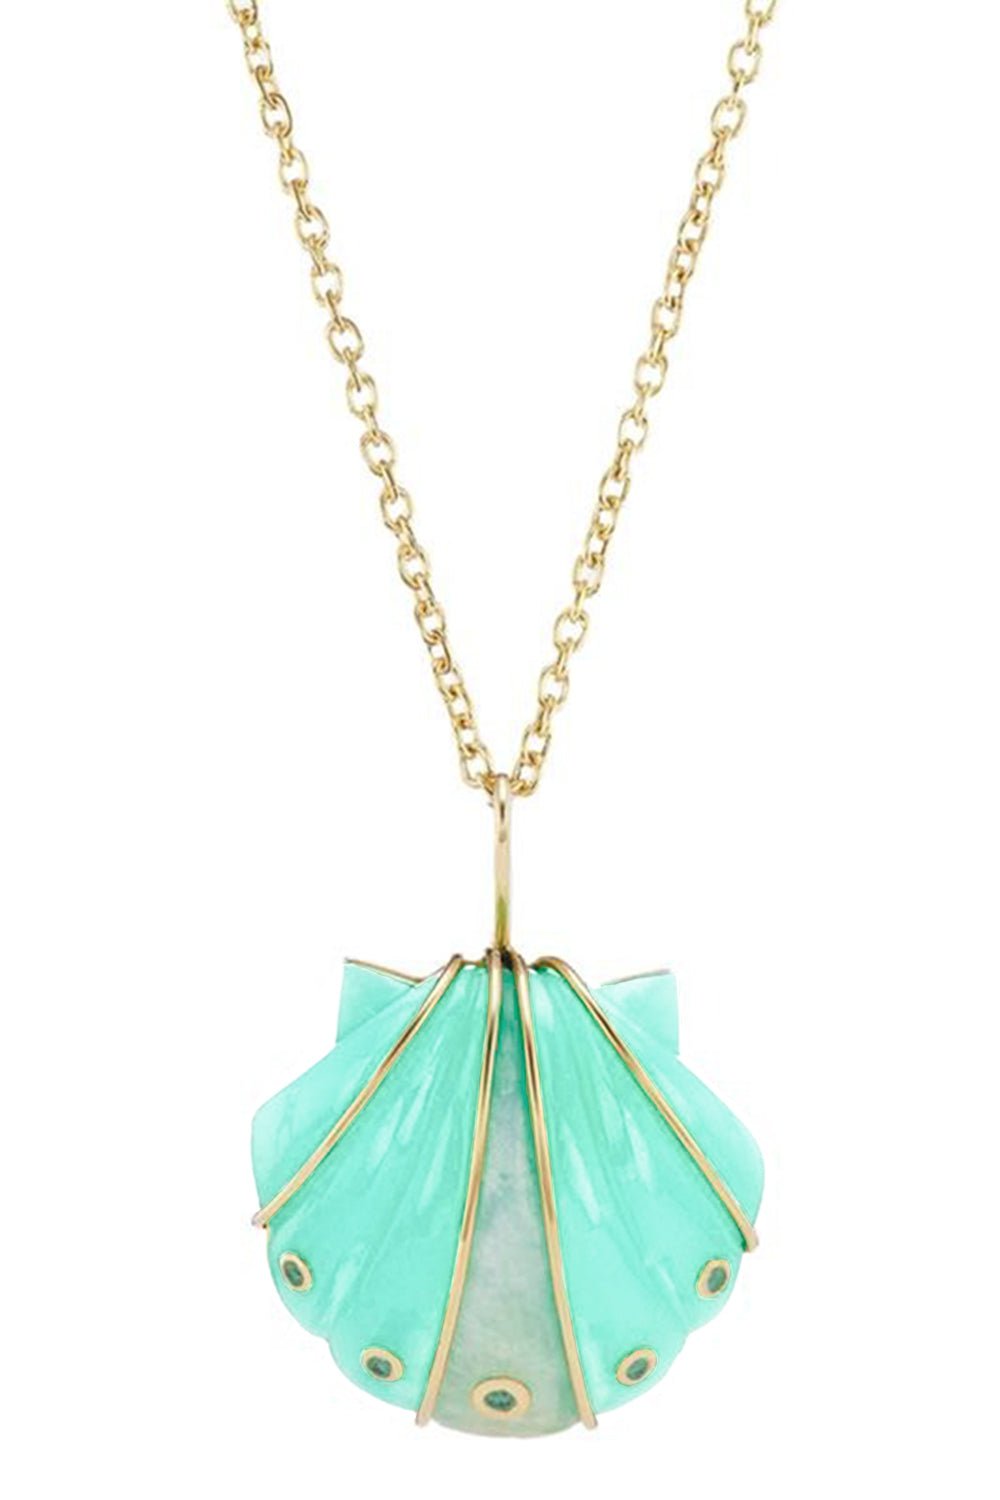 BRENT NEALE-Small Mint Chrysoprase Moonstone Shell Pendant Necklace-YELLOW GOLD